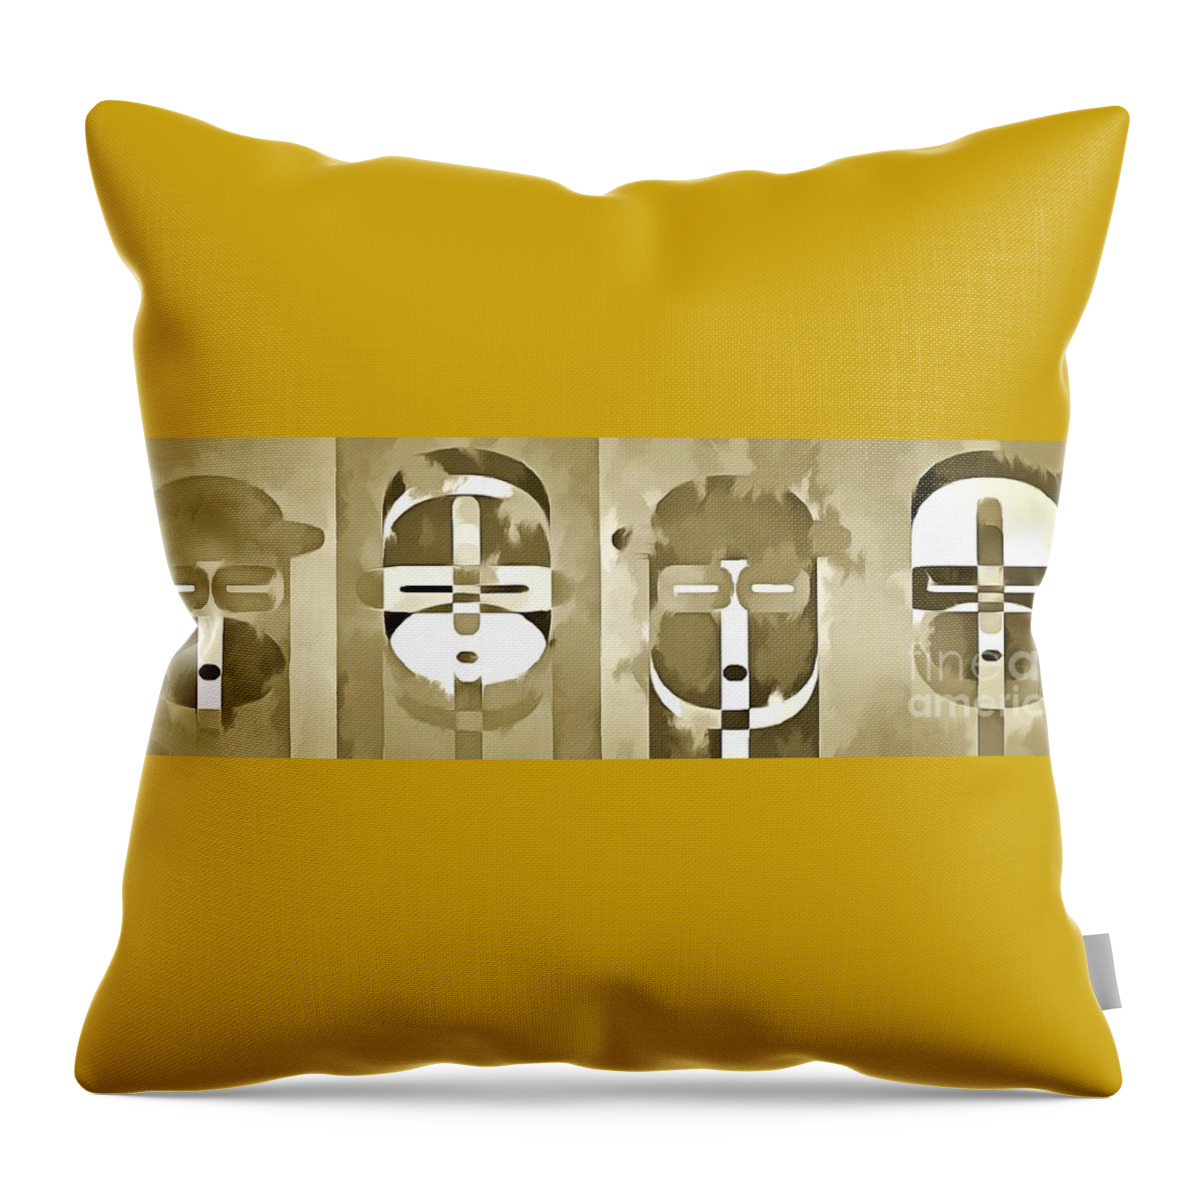 Pop Throw Pillow featuring the photograph Pop Art People Monochromatic 2 by Edward Fielding